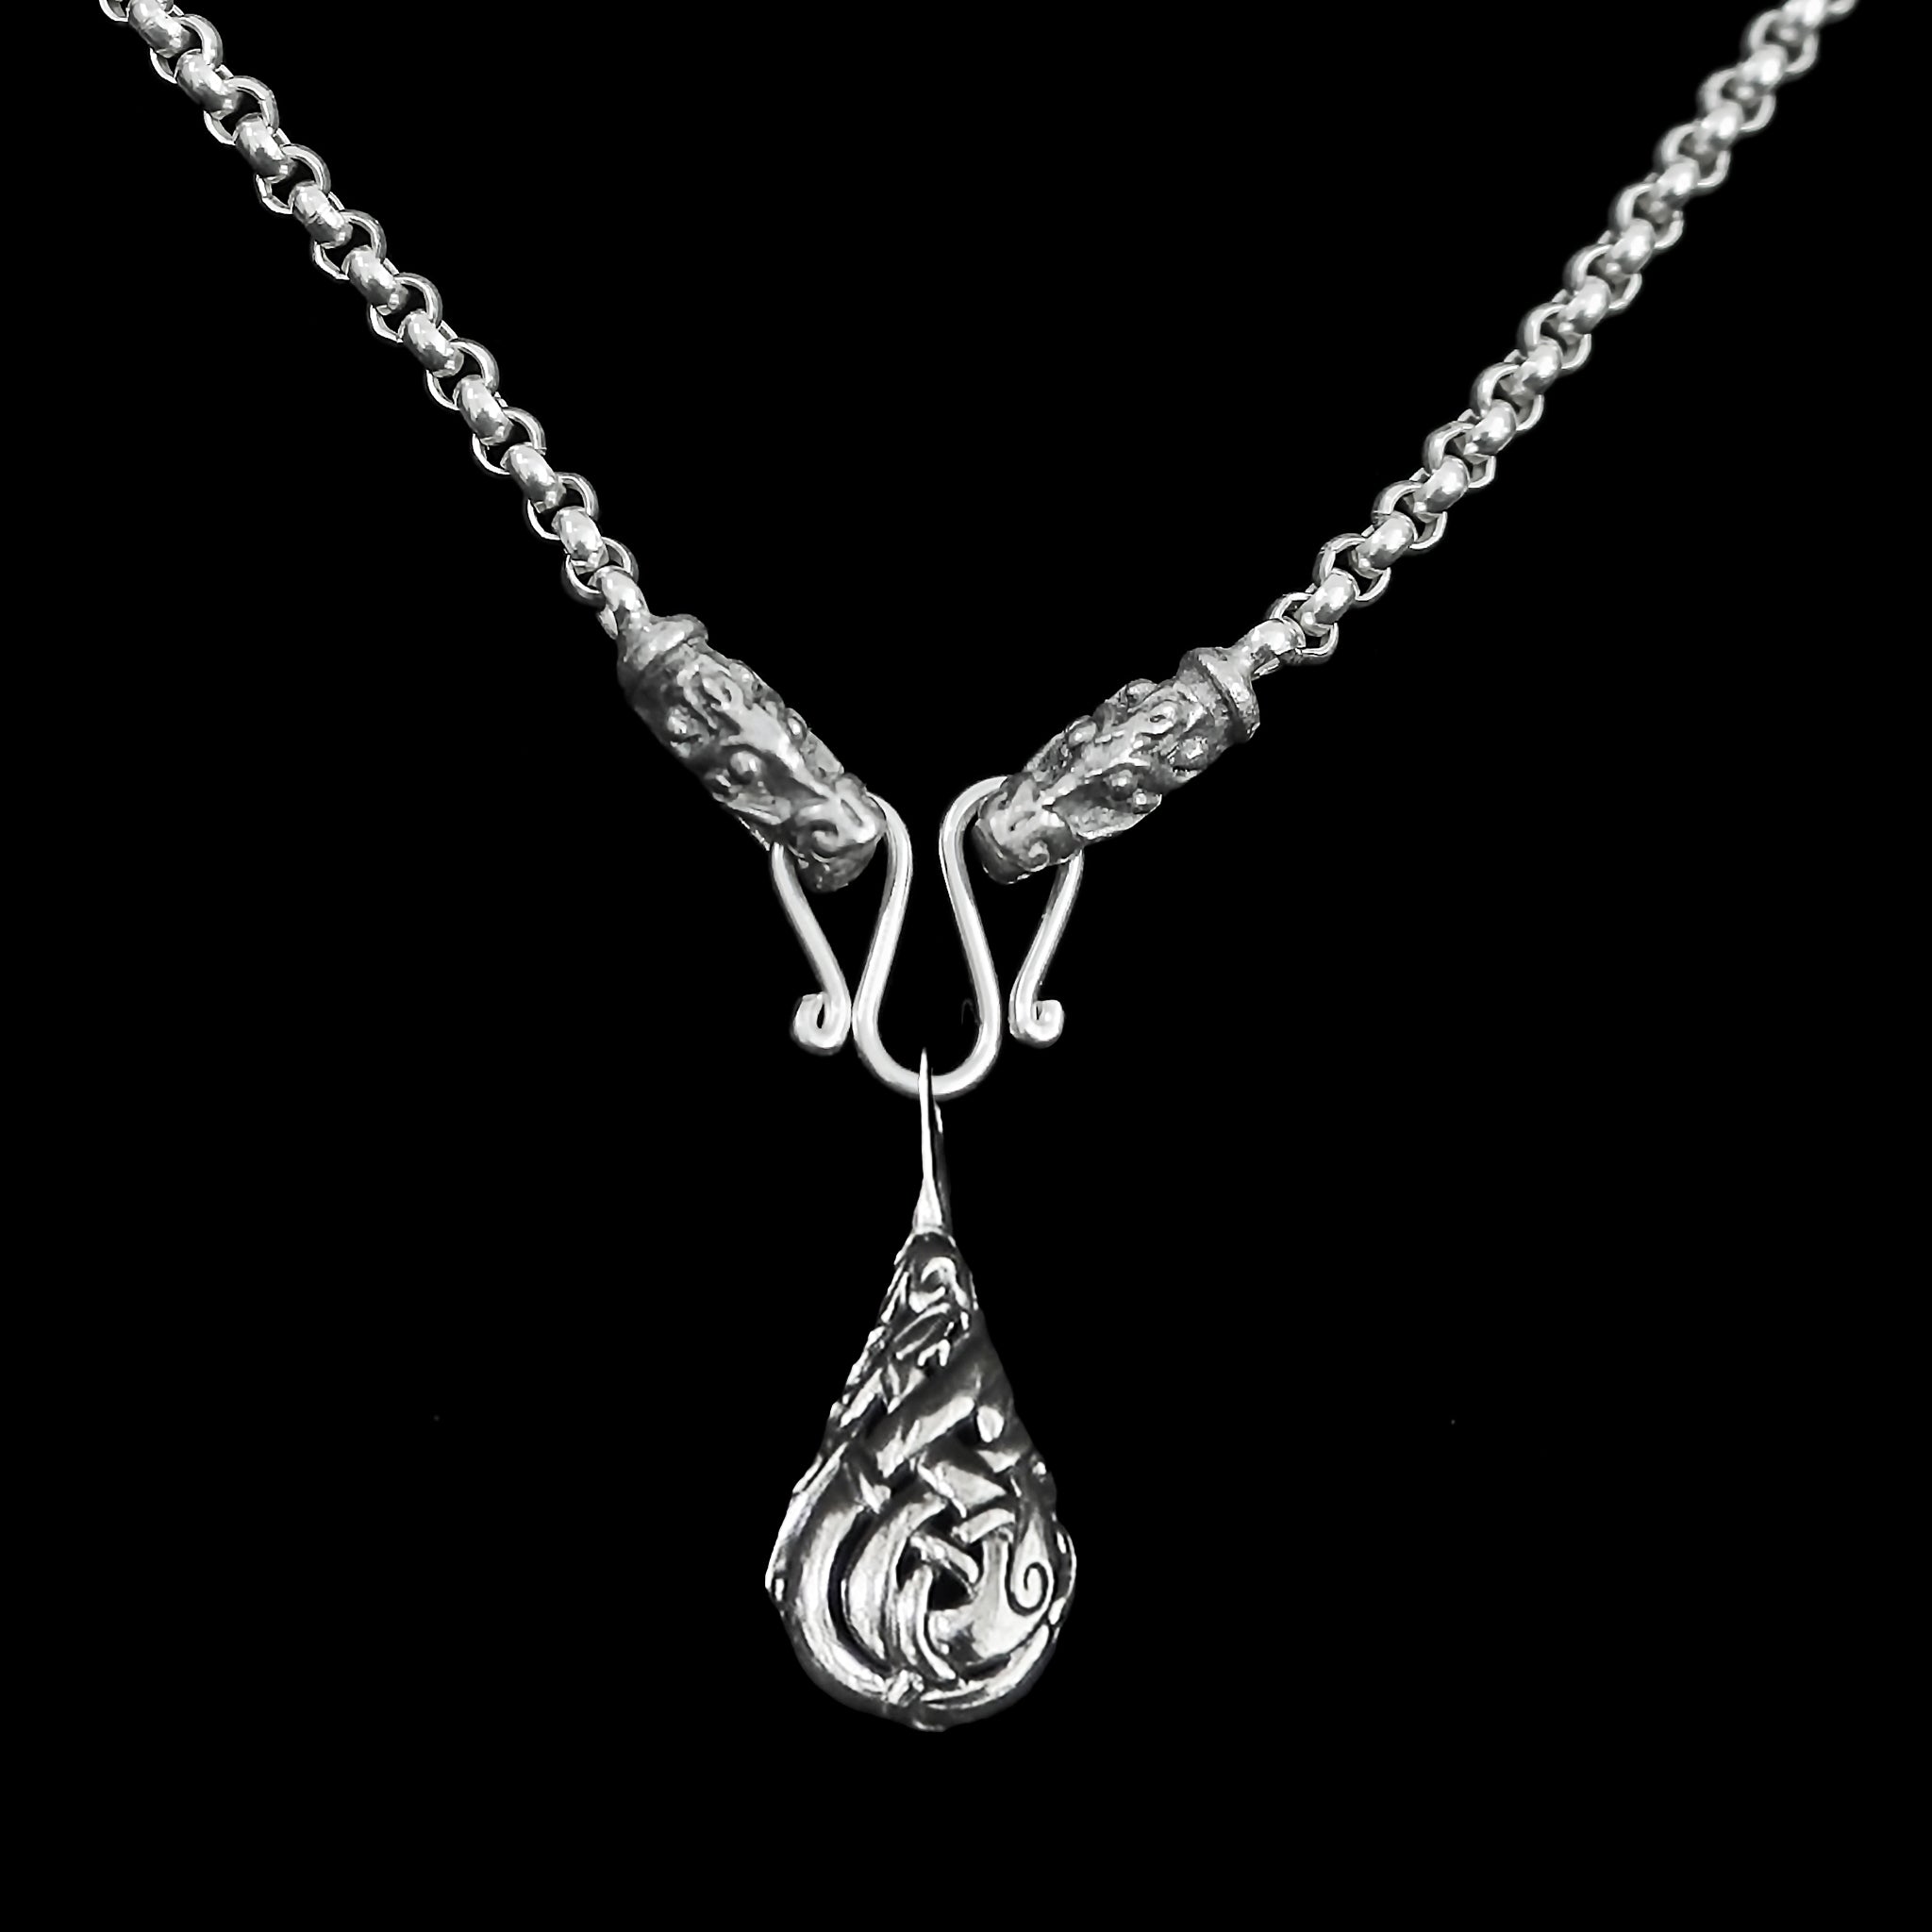 Slim Silver Anchor Chain Pendant Necklace with Gotland Dragon Heads with Urnes Teardrop Pendant